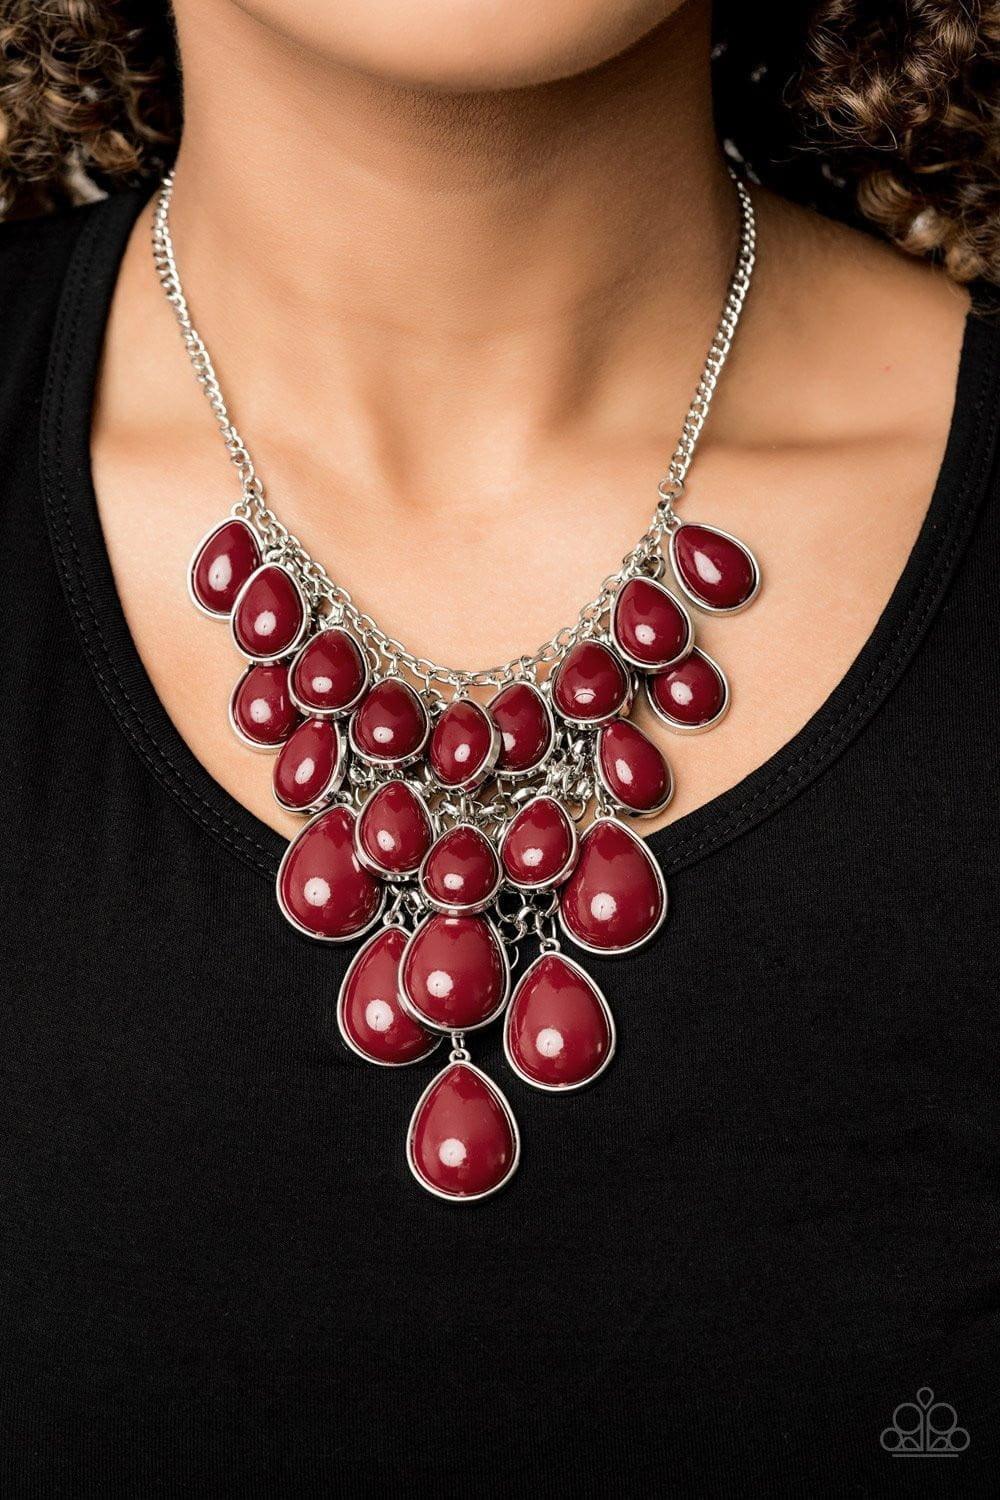 Paparazzi Accessories - Shop Til You Teardrop - Red Necklace - Bling by JessieK